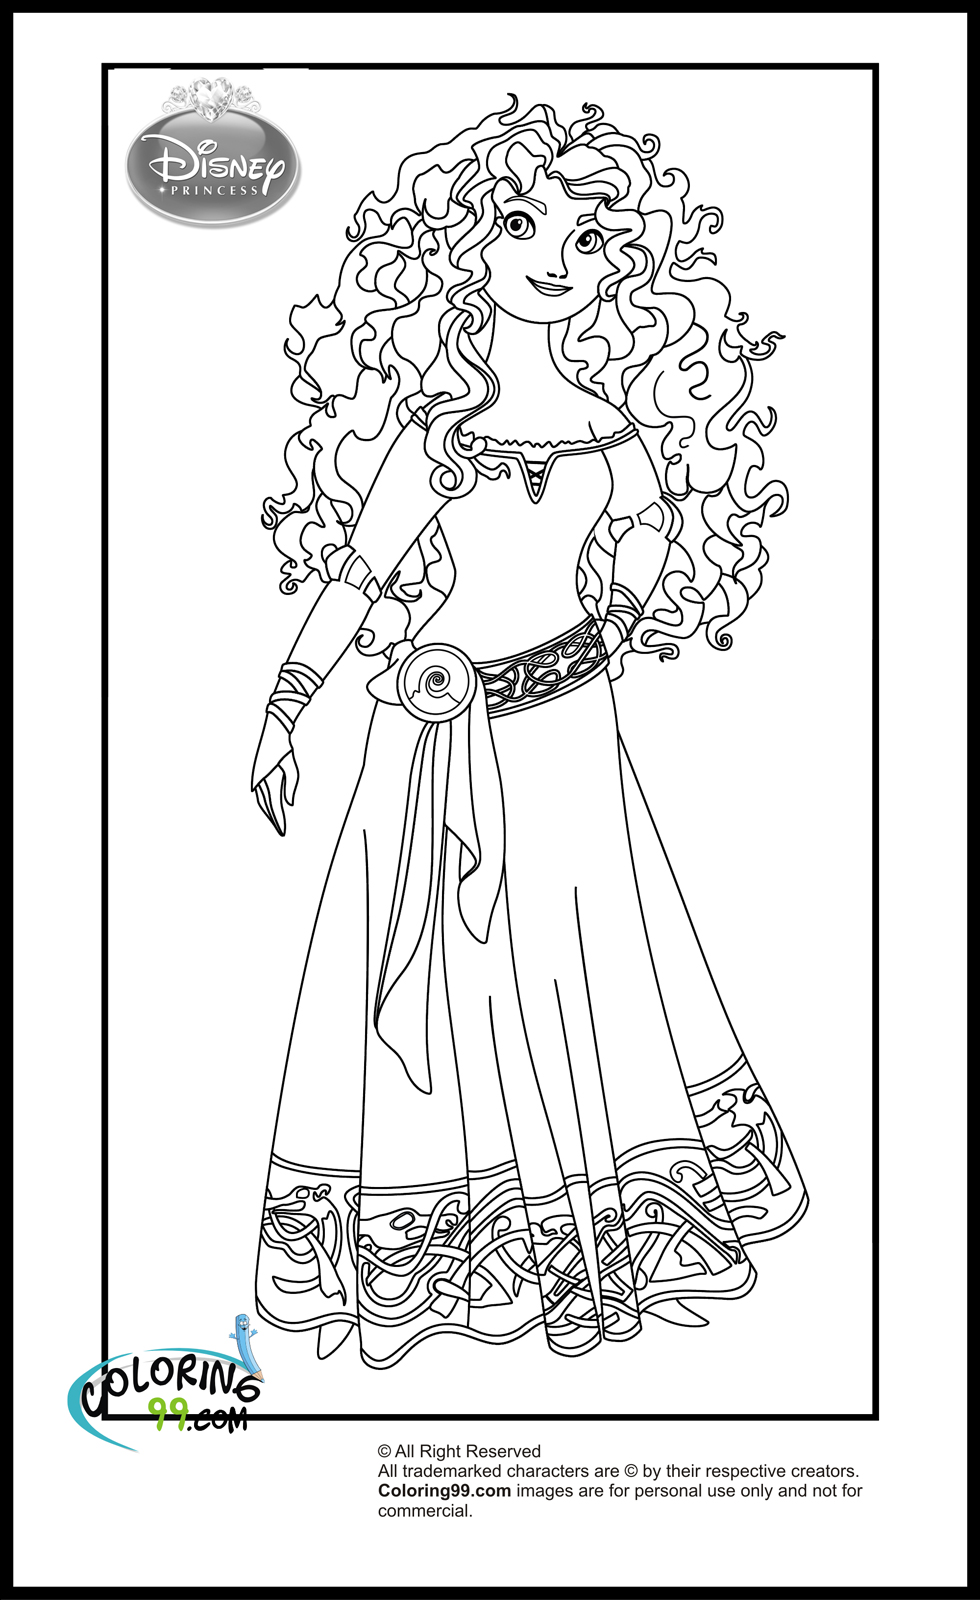 Download Disney Princess Coloring Pages | Minister Coloring